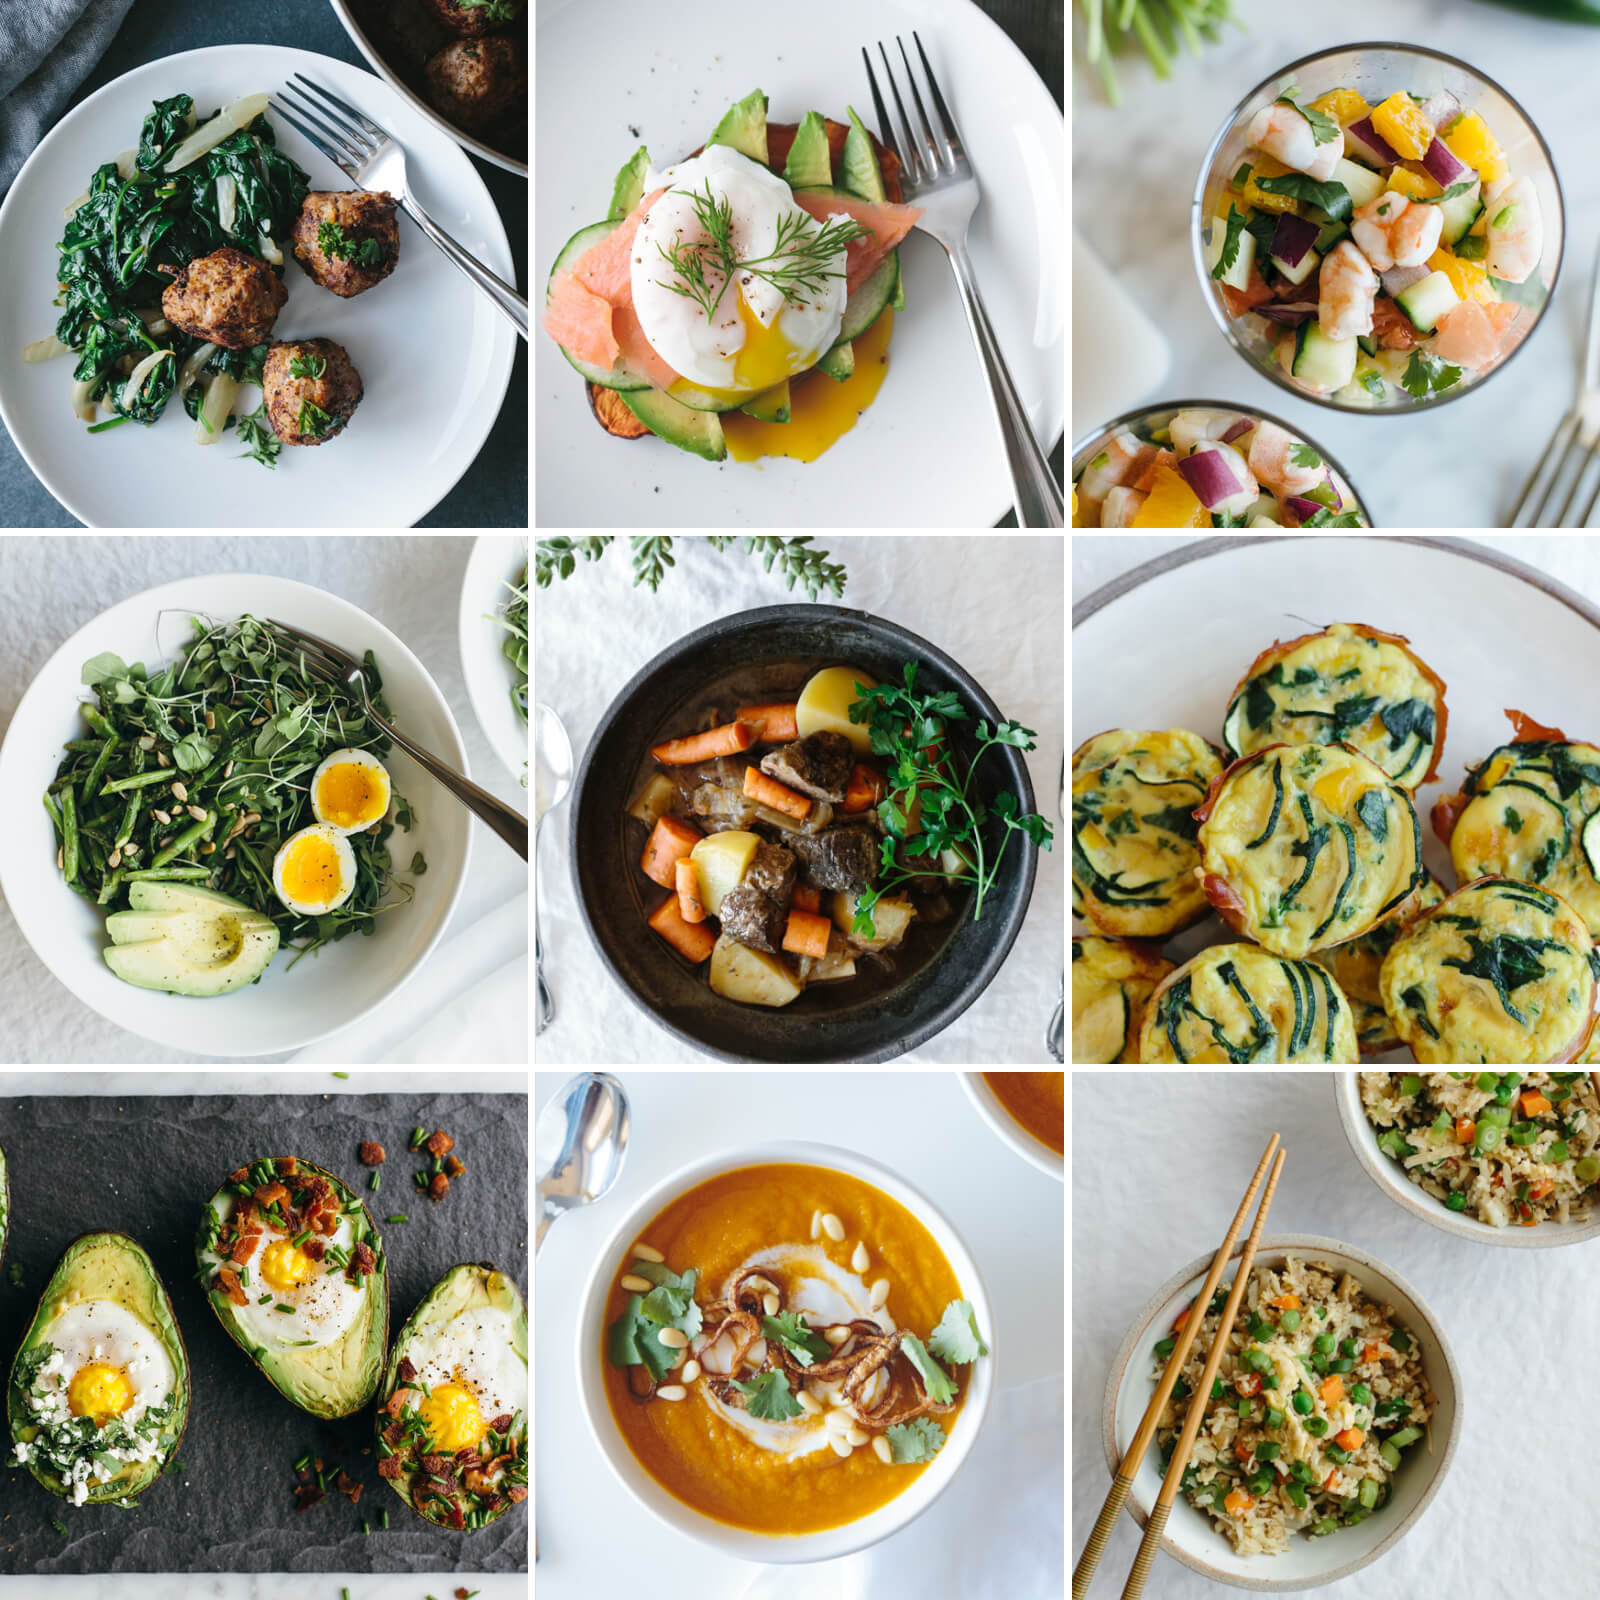 Breakfast Lunch Dinner
 15 Whole30 Recipes for Breakfast Lunch and Dinner